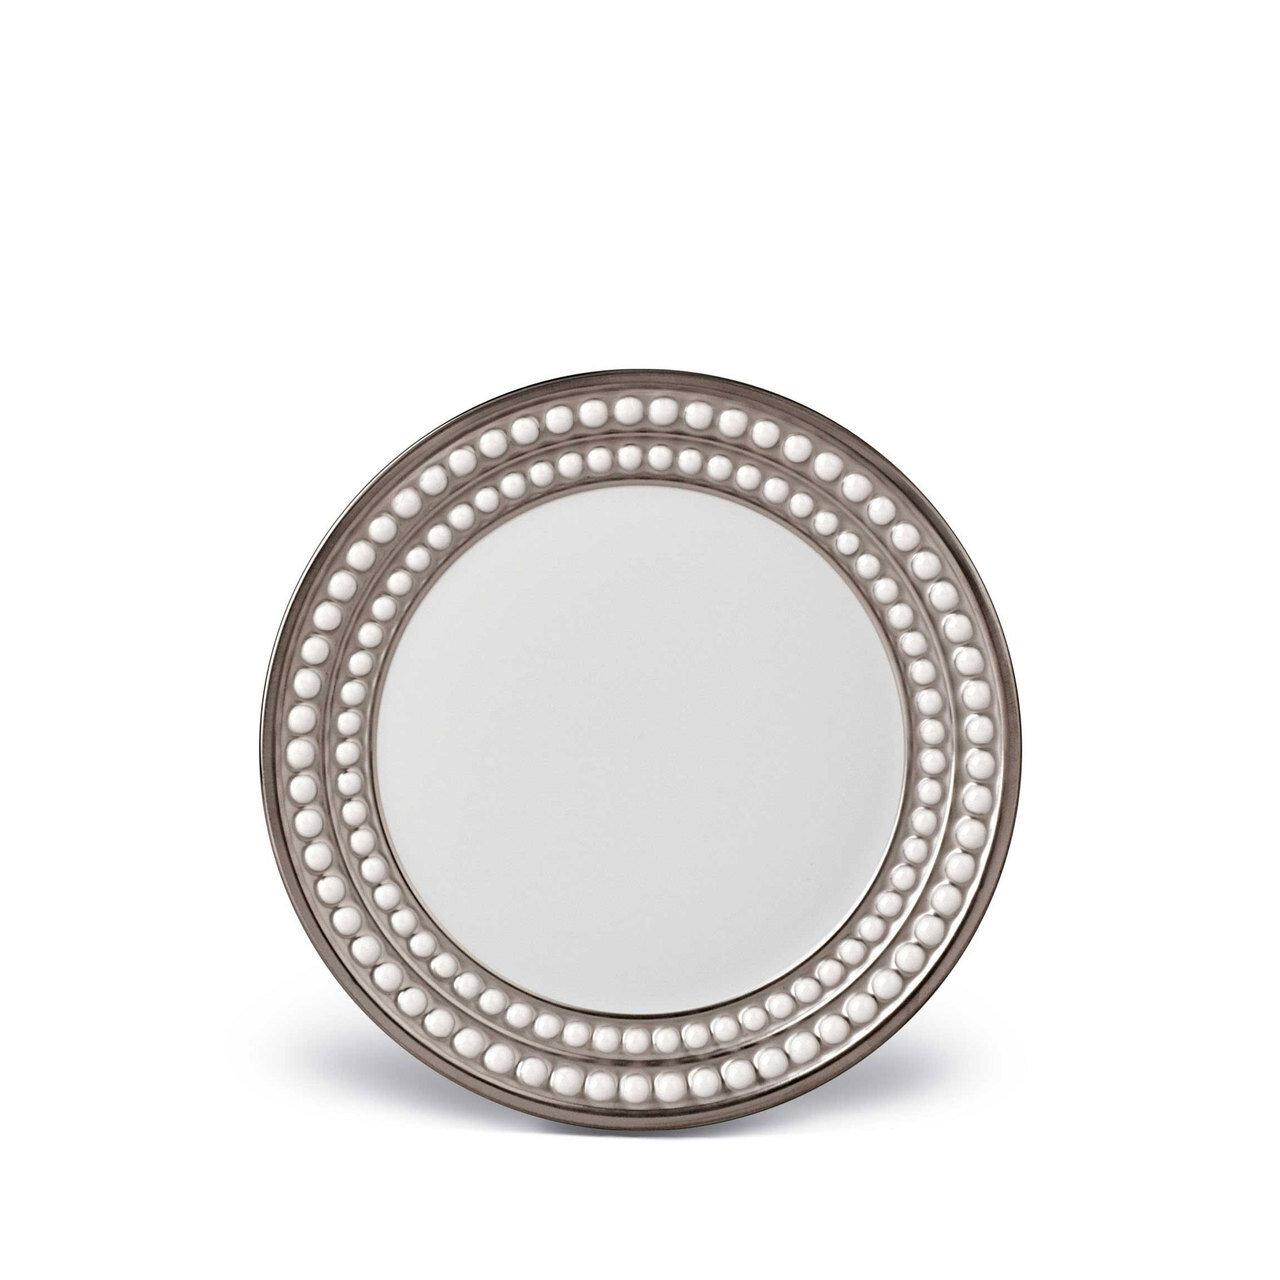 L'Objet Perlee Bread and Butter Plate Platinum